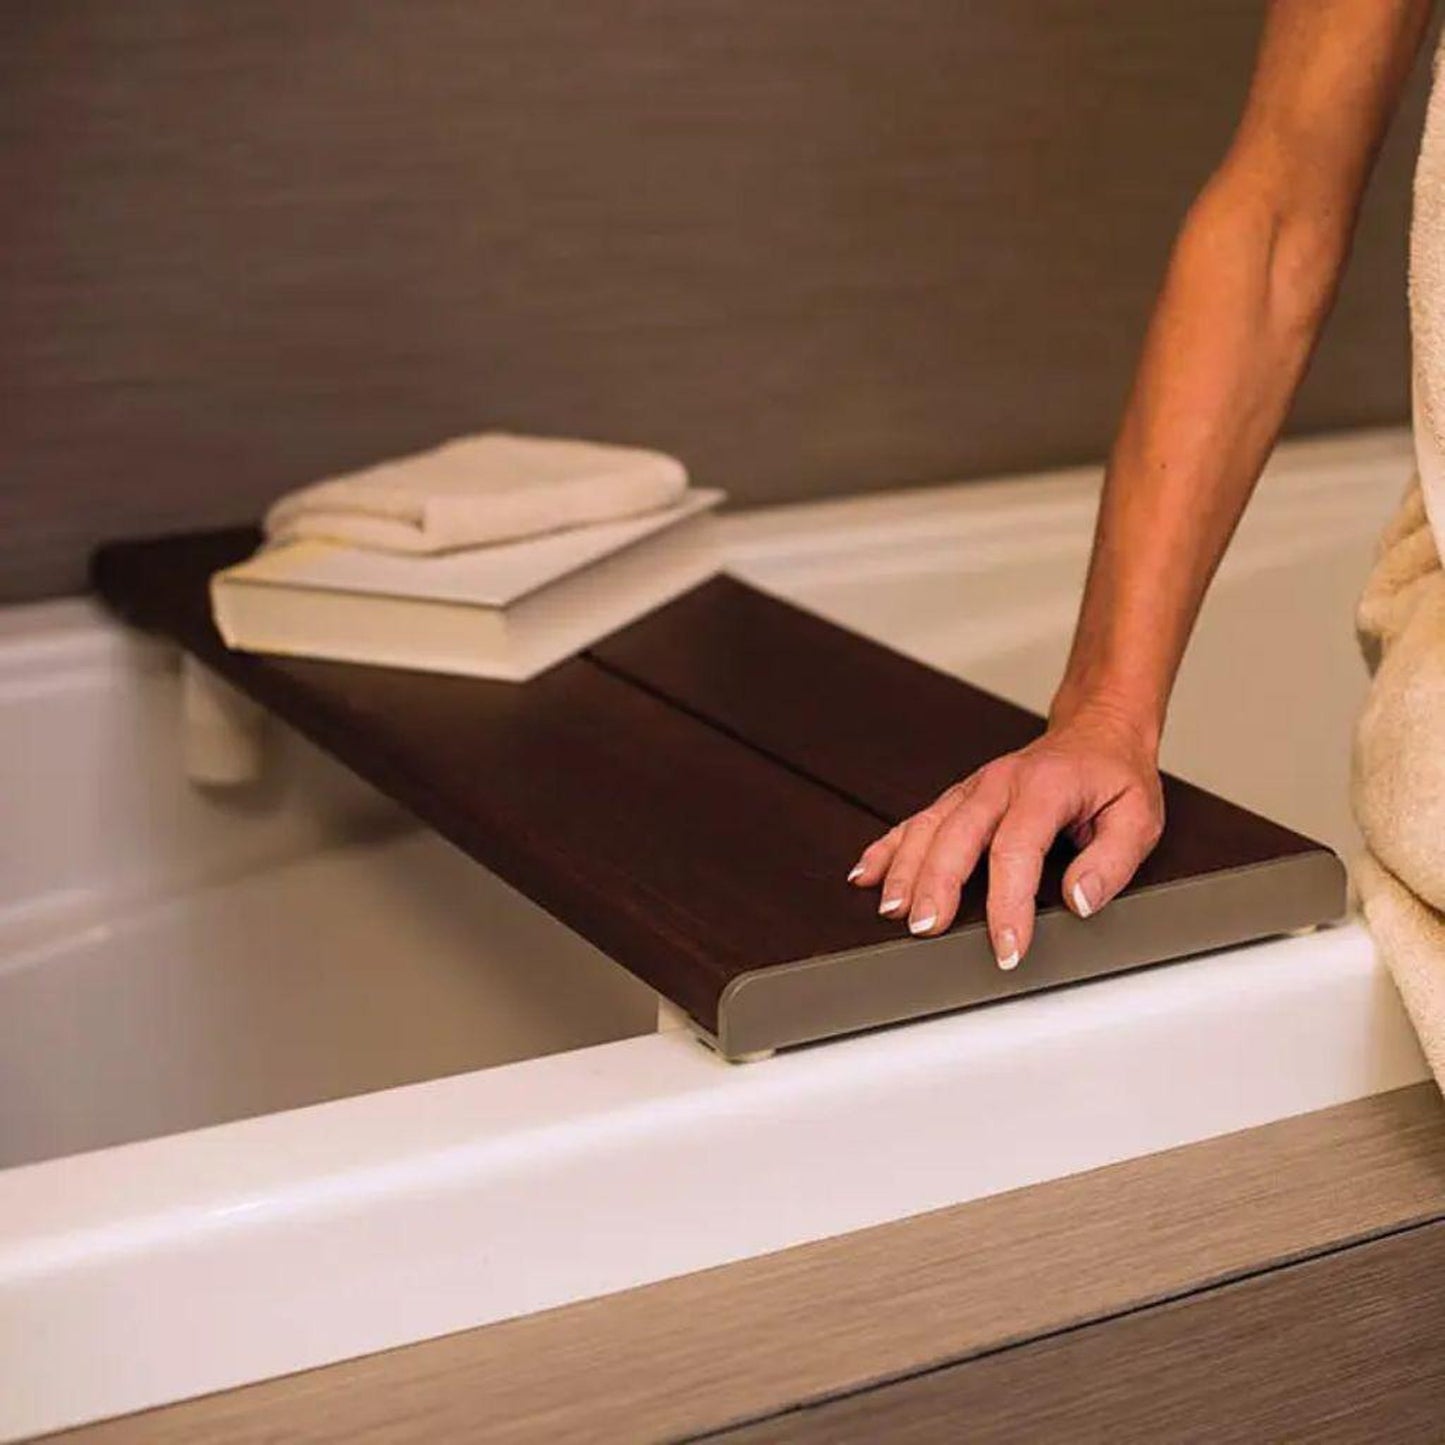 Invisia 30” Rectangle Walnut Stained Bamboo Bath Bench for Bathtub With Oil Rubbed Bronze Frame